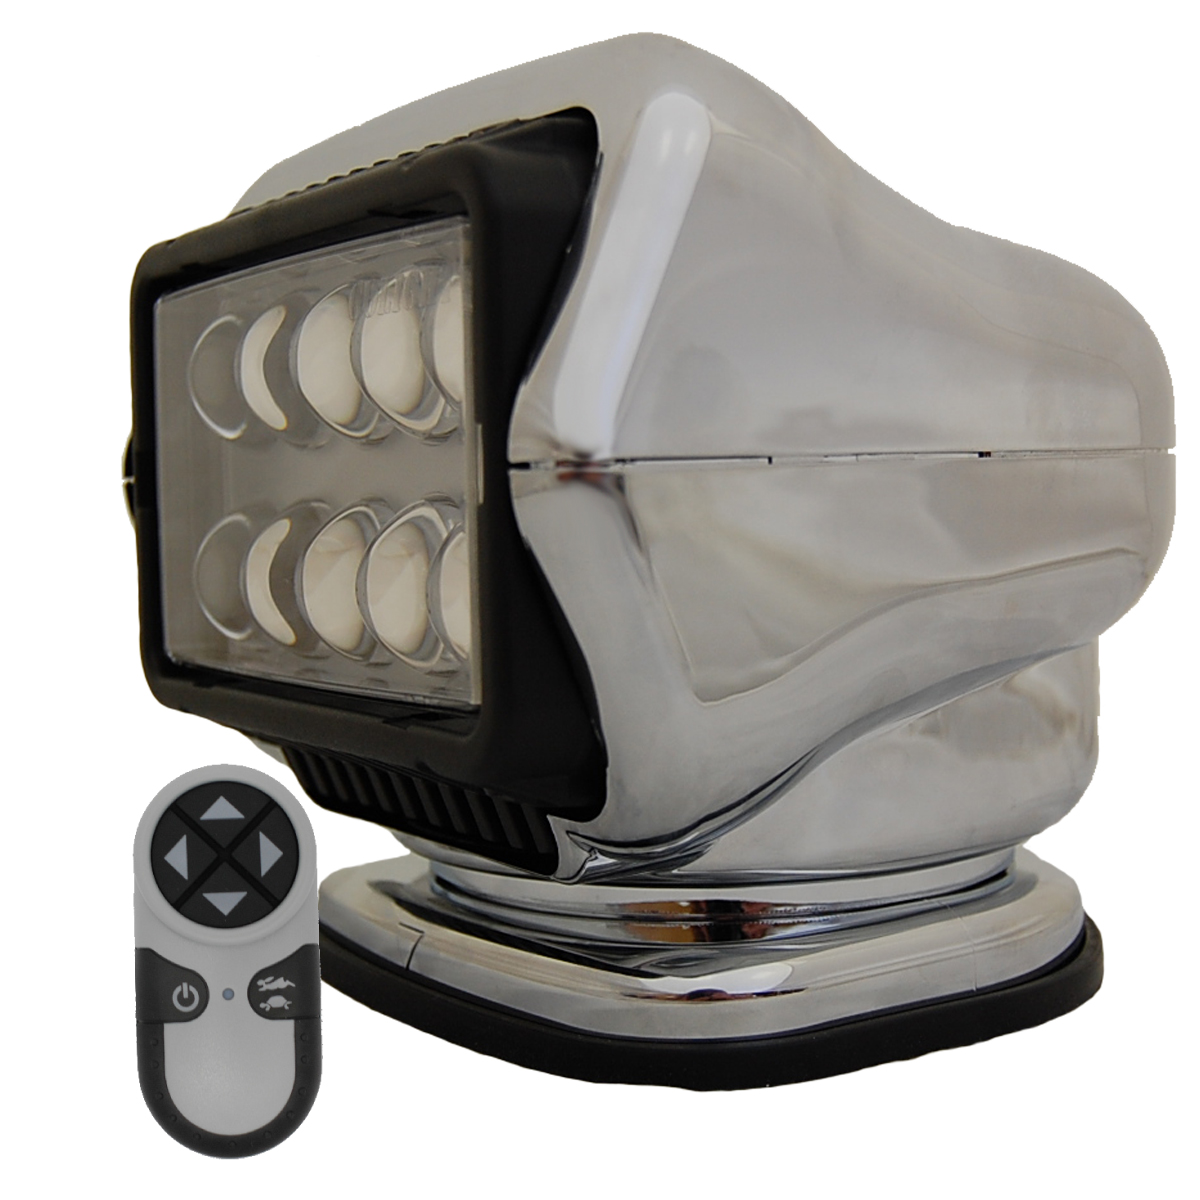 STRYKER - LED Remote Control Searchlight With Wireless Handheld Remote - Chrome 30064ST Stryker, Lights, lighting, wireless, remote, searchlight, searchlights, mount, mounting, search, light, safety, LED, Halogen, beam, light beam, search & rescue, rescue, search and rescue, CERT, emergency, spotlight, spot light, agriculture, farm, farming, farmer, outdoor, nighttime, outdoor activities, camp, camping, hunting, boating, off-roading, offroading, event lights, event lighting, lighting, fire, police, municipal, tow, towing, plow, plowing, snow plow, truck lights, rv, RV, recreation, recreation vehicle, law enforcement, marine lighting, work vehicle lights, golight, Golight, Golite, golite, radioray, Radioray, radio, ray, vehicle, truck, automotive, heavy equipment, floodlight, flood, light